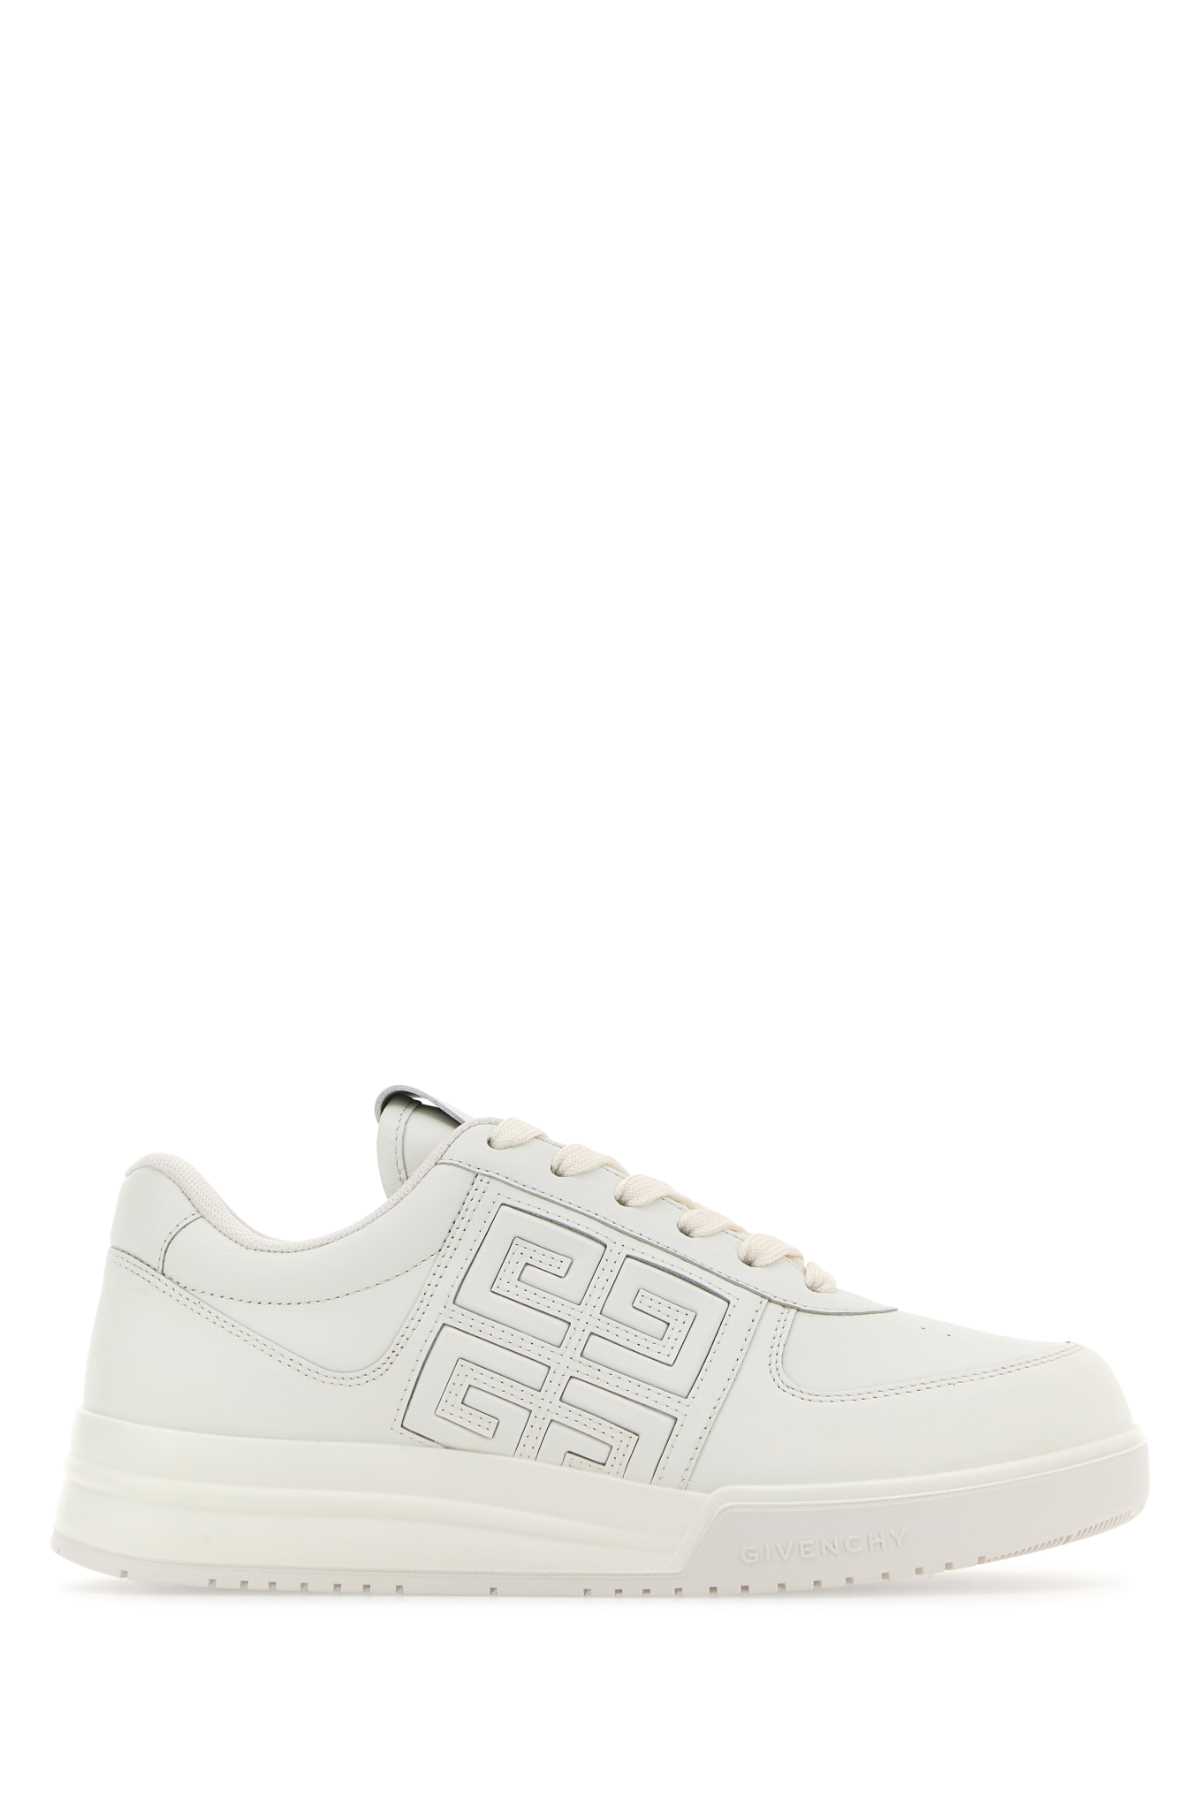 GIVENCHY WHITE LEATHER G4 SNEAKERS